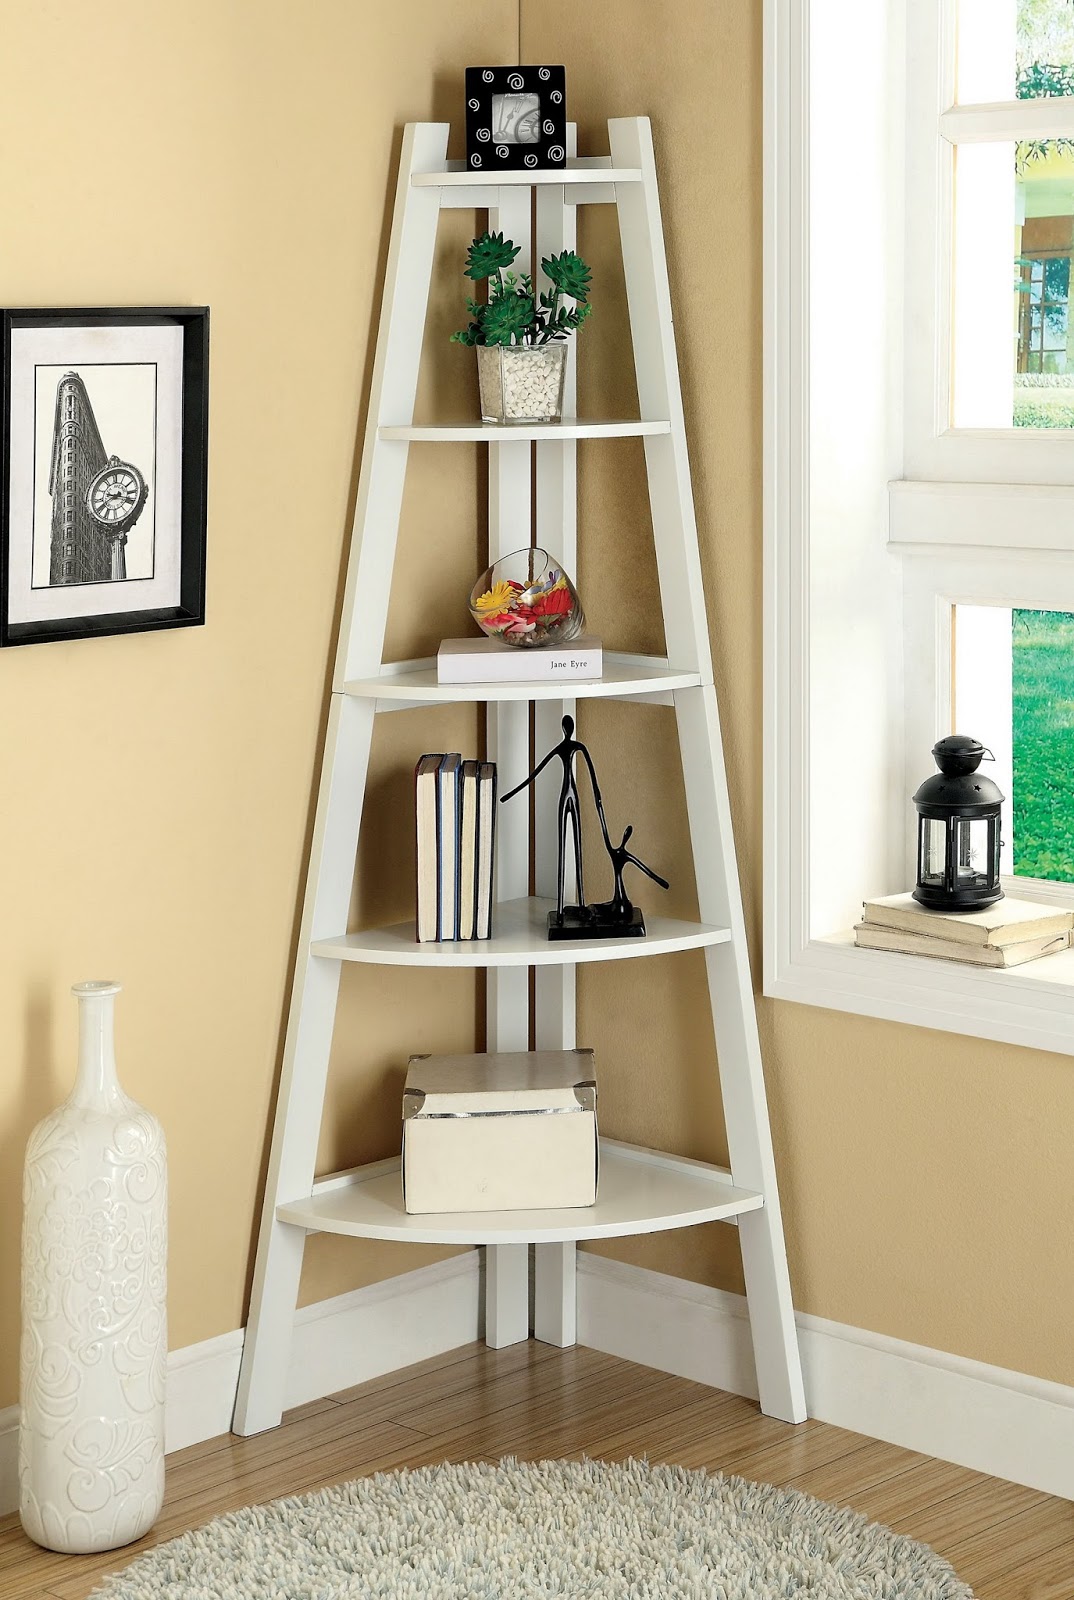 Home Priority The Practical Corner Wall Shelf that